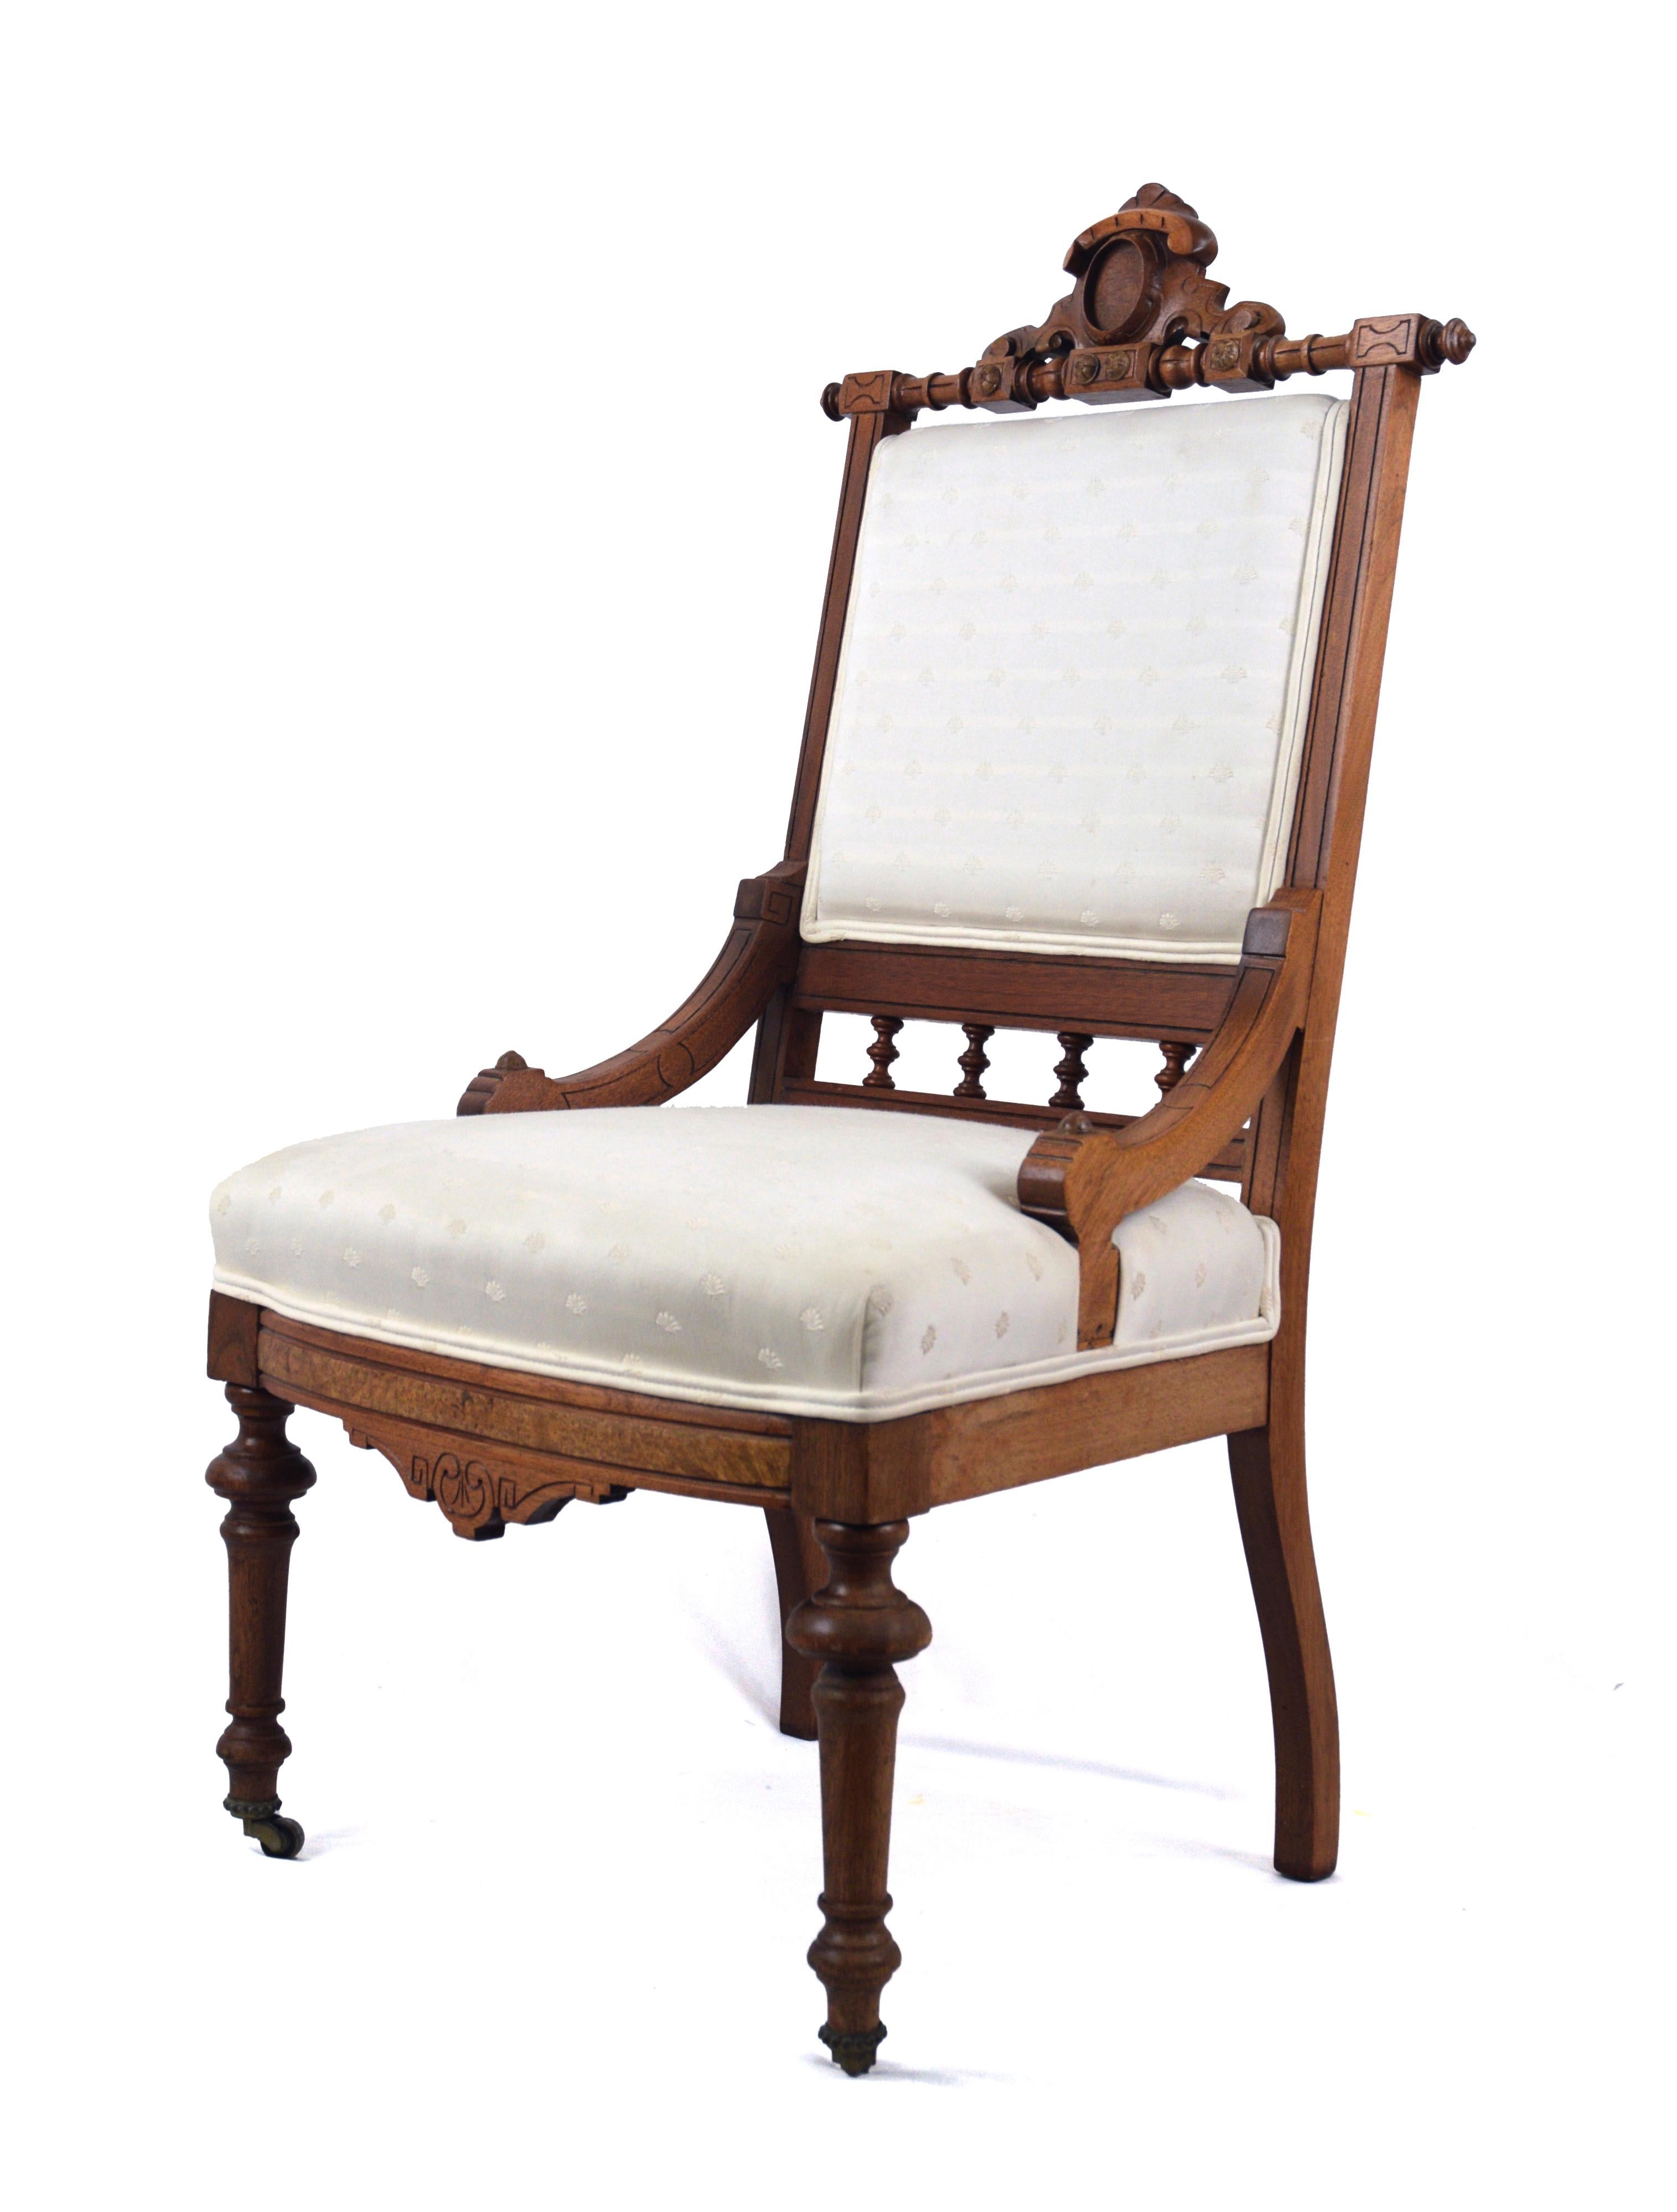 Brocade-Upholstered Eastlake Chair with Casters

Hand-carved wooden chair with off-white brocade fabric. The back and seat are matching, with double piping throughout. The front two legs feature rolling wheels but the back two legs are stationary.